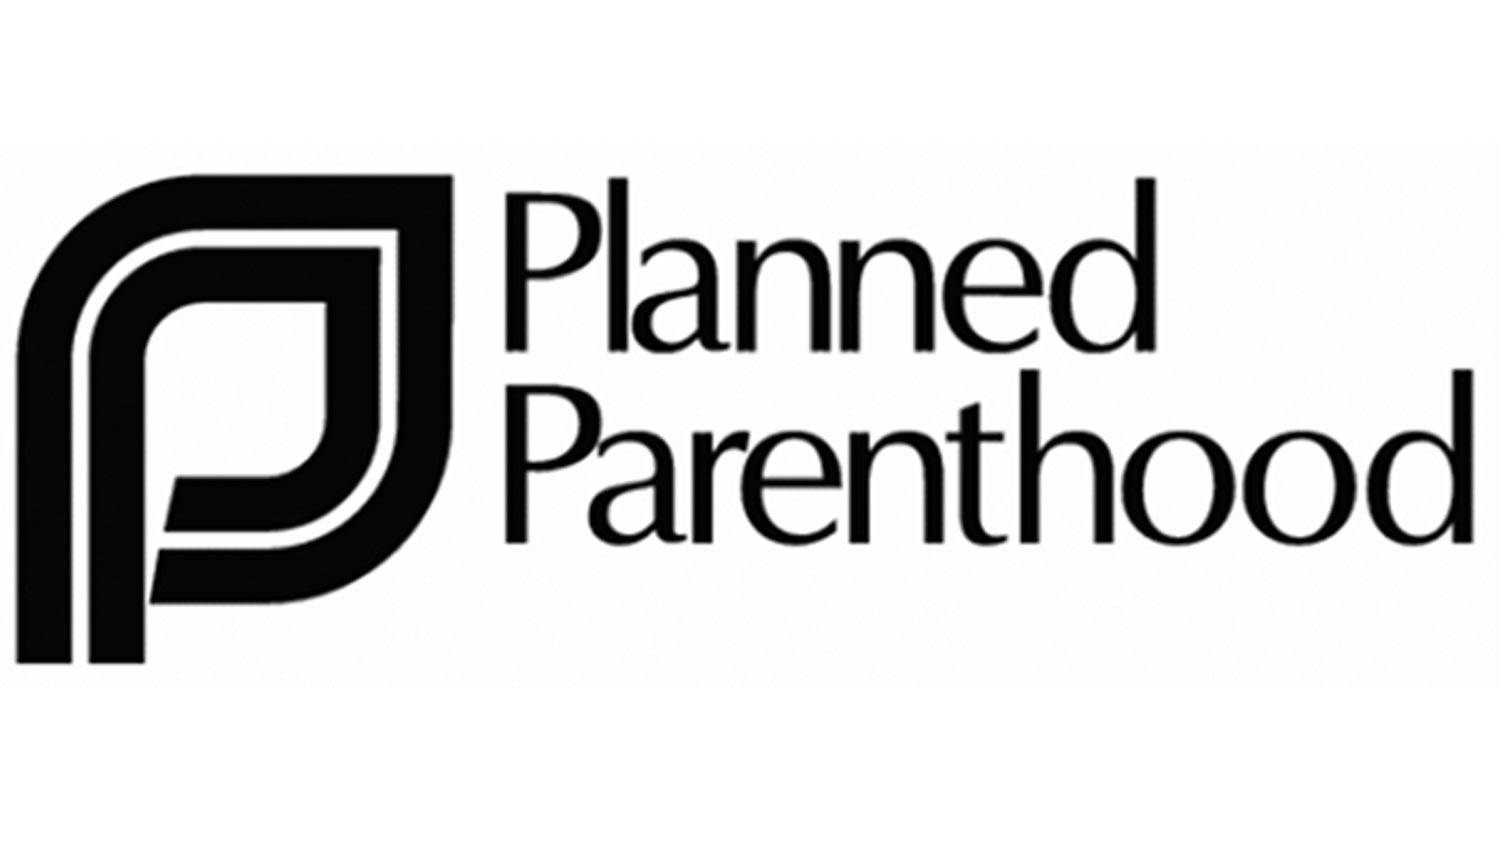 Planned Parenthood to open new abortion clinic in Warr Acres